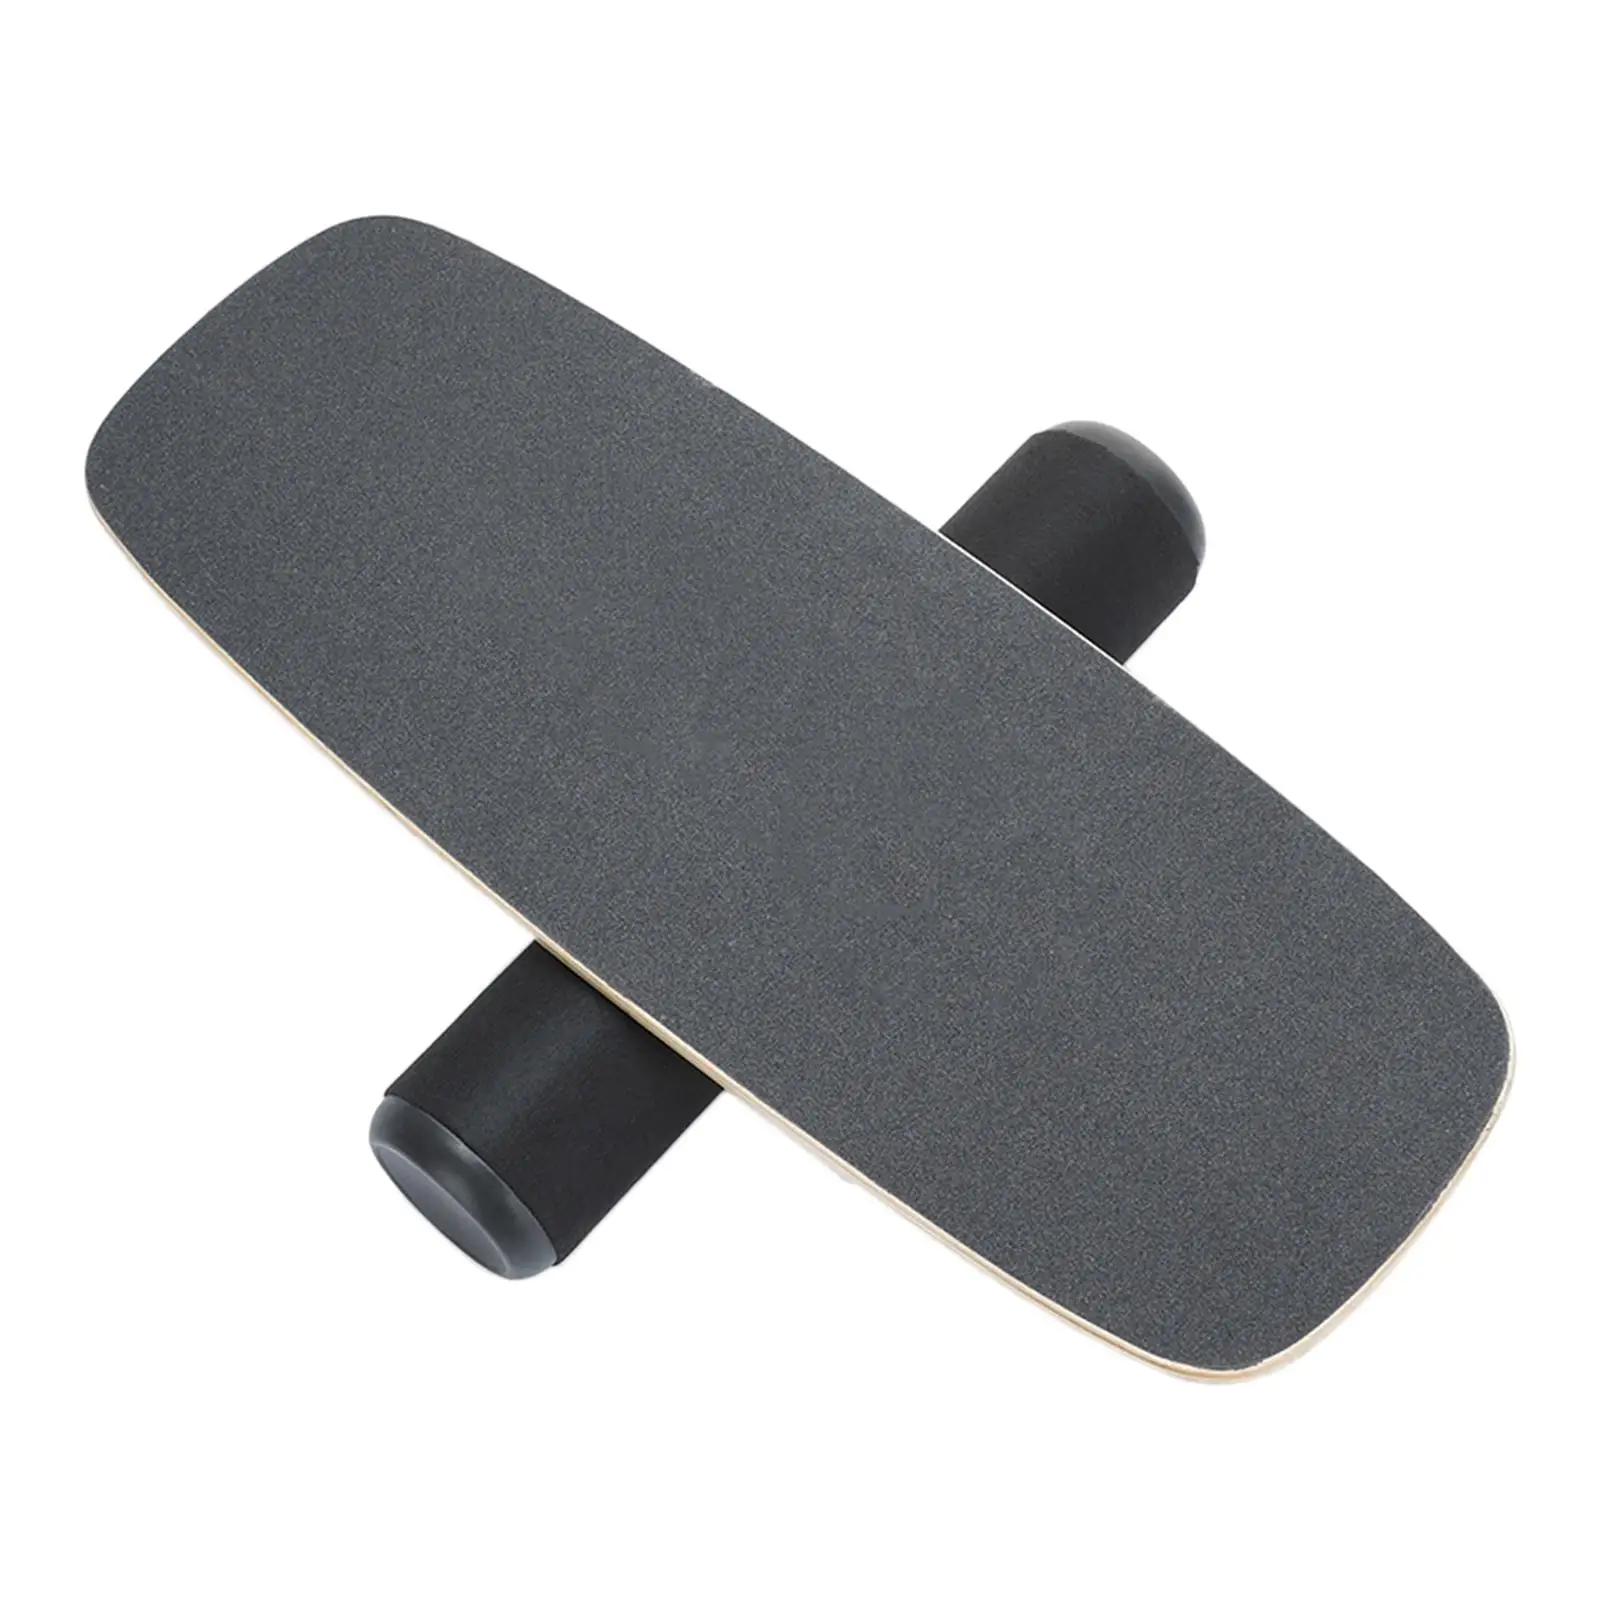 Wooden Balance Board Trainer Fitness Accessories Stability Roller Anti slip